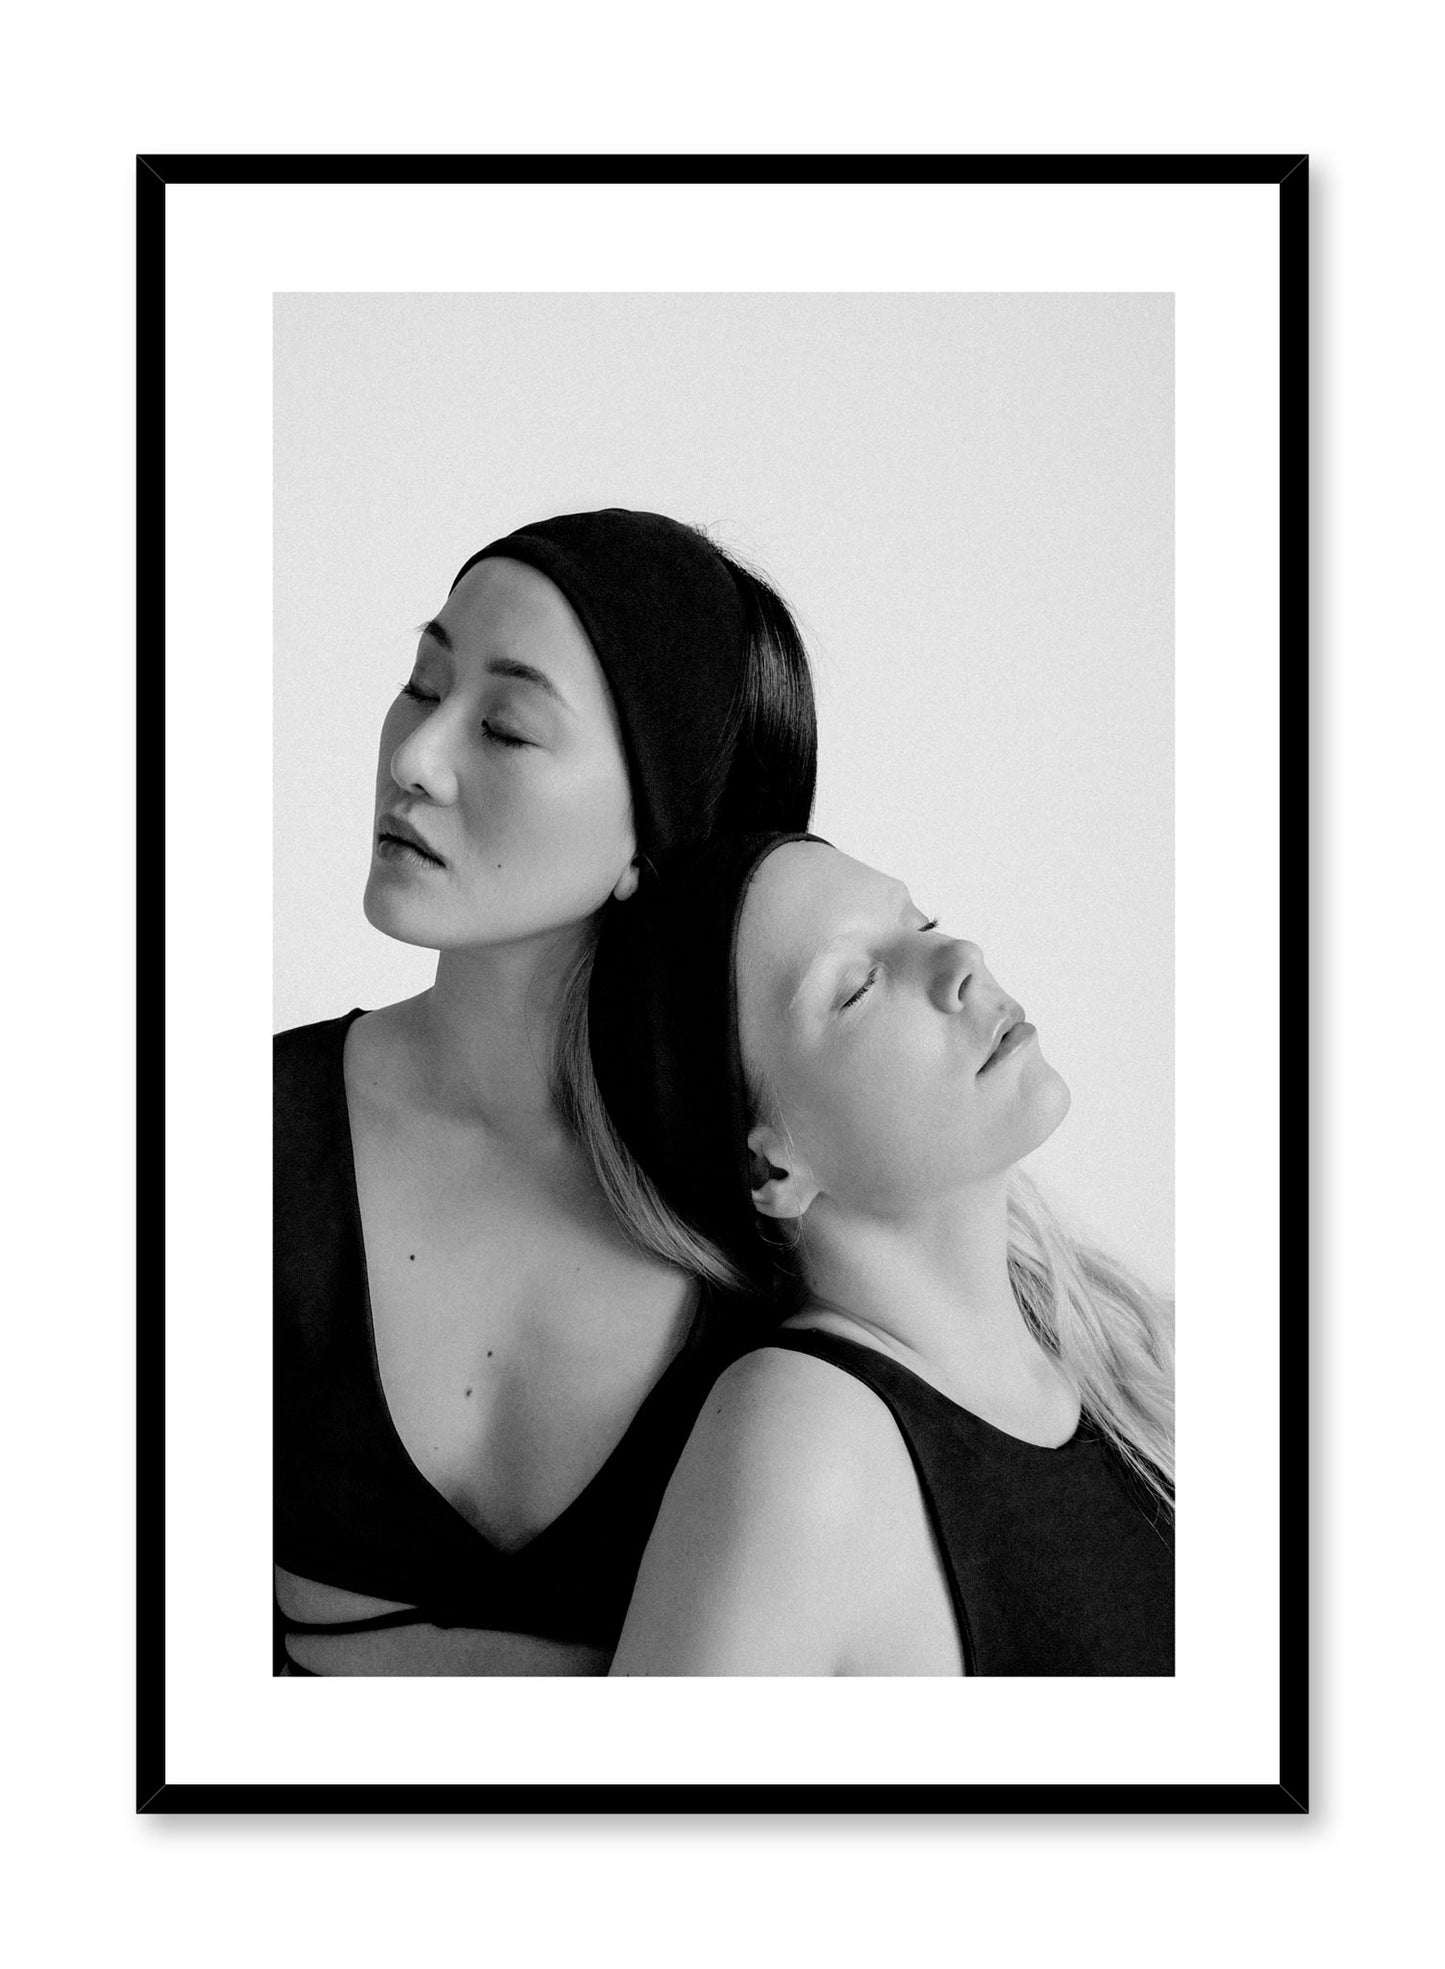 Black and white fashion photography poster by Opposite Wall with woman leaning on each other